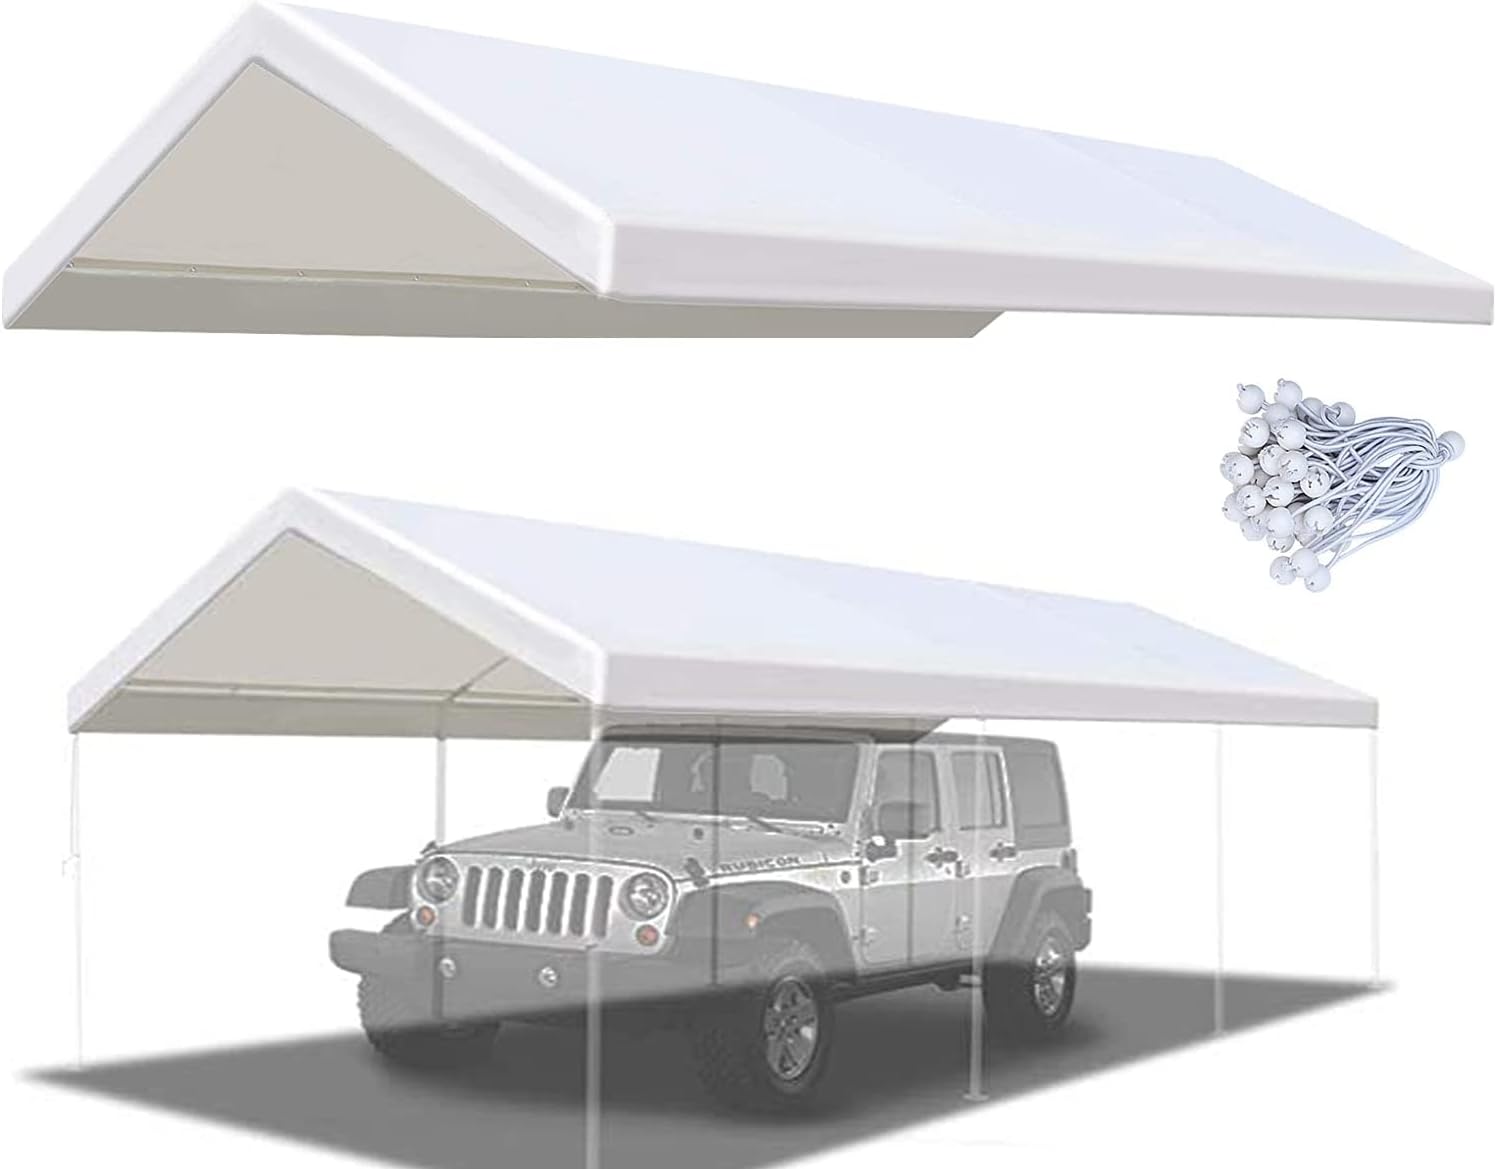 Samfall 10x20 ft Carport Car Replacement Canopy Cover for Car Tent Party Tent Top Garage Shelter Cover with 26 Ball Bungees(Only Cover,